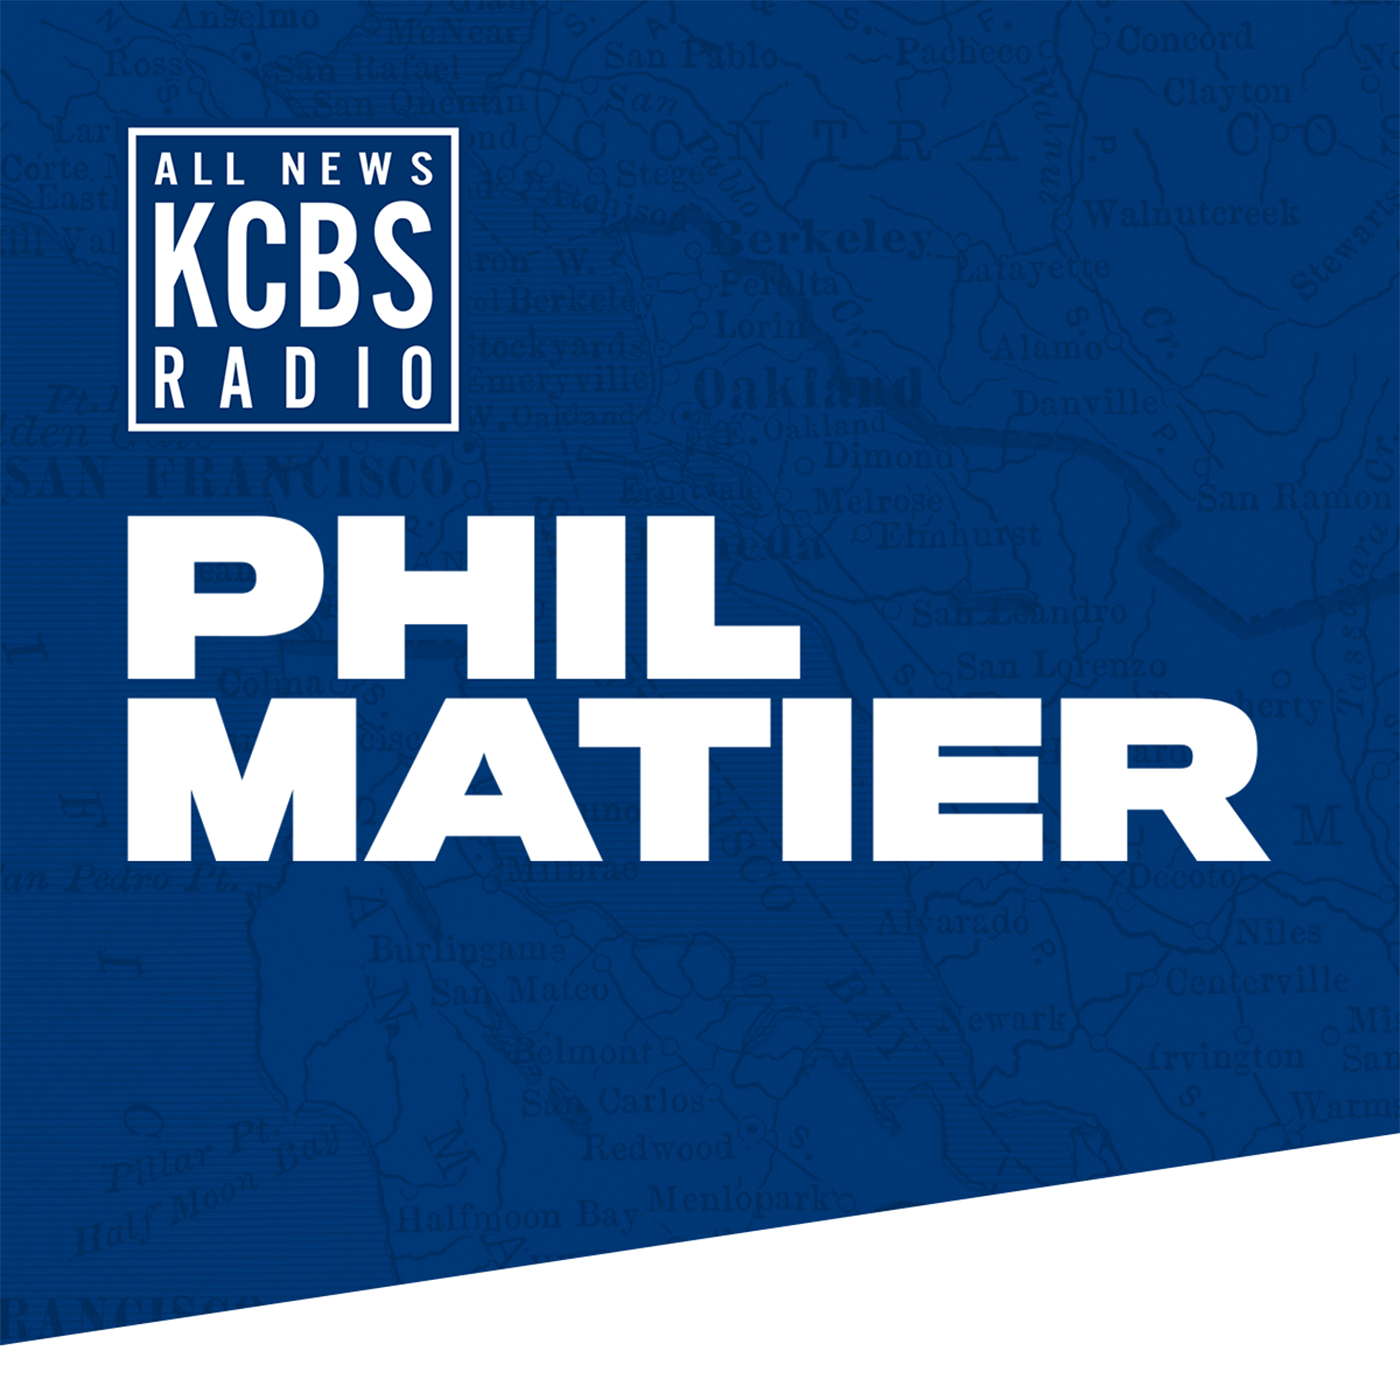 Phil Matier: Mayor London Breed Outlines Reopening